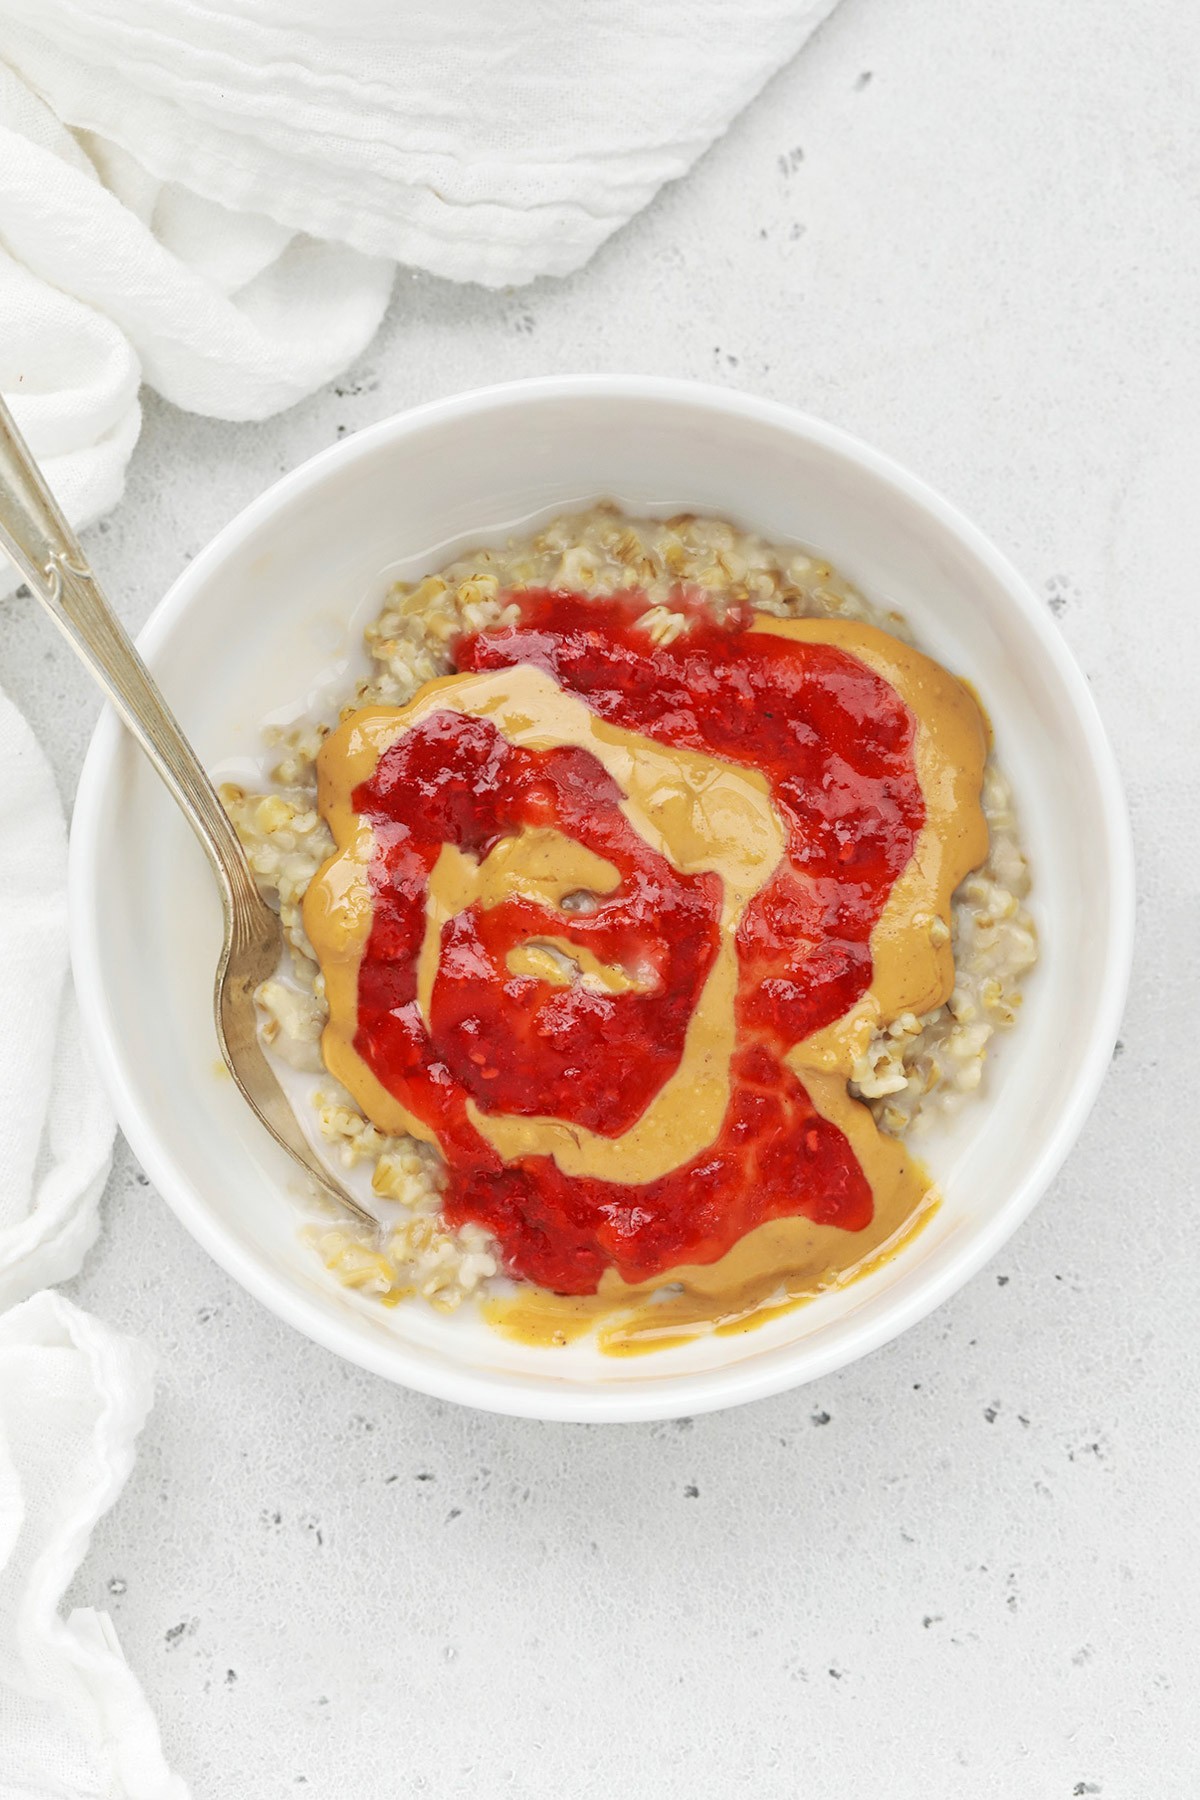 Overhead view of a bowl of stovetop steel-cut oats with peanut butter and raspberry jam